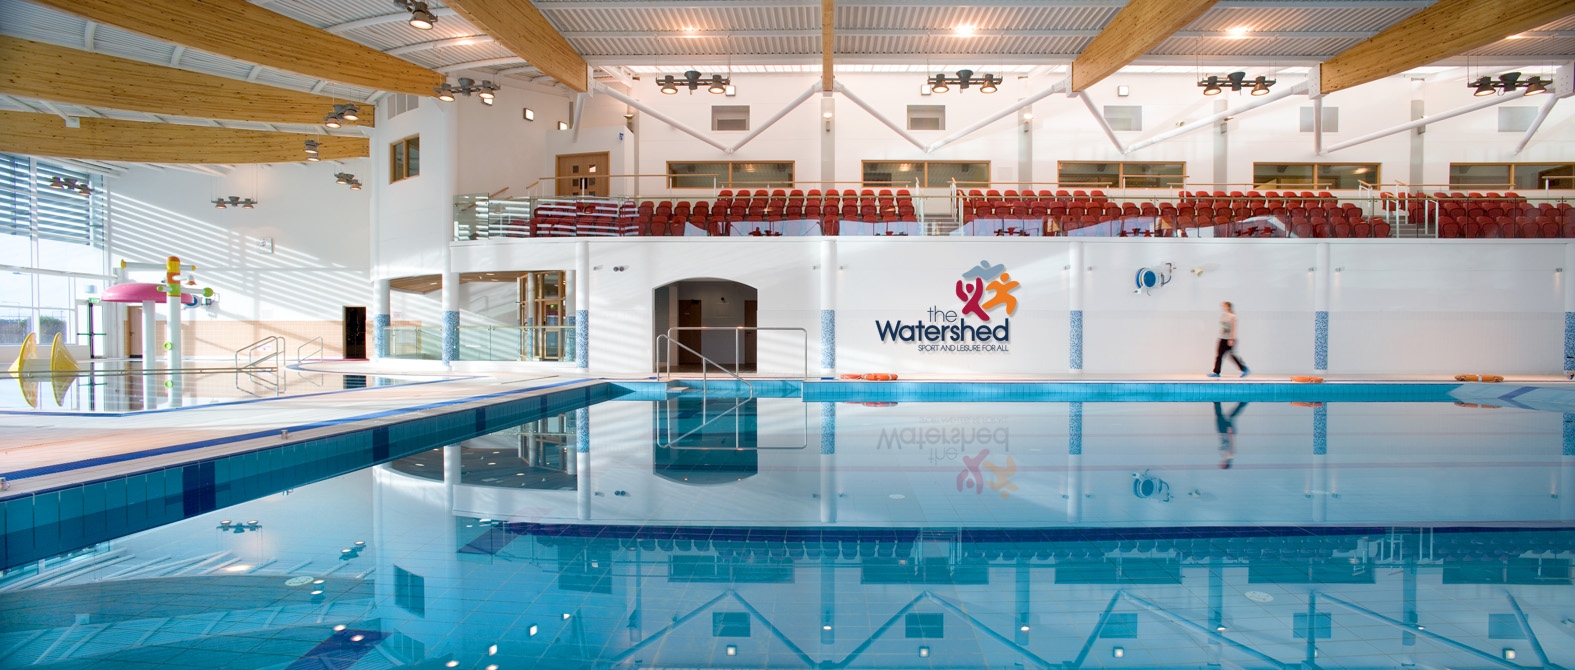 Pool With Watershed Logo (Threesixty) (1)